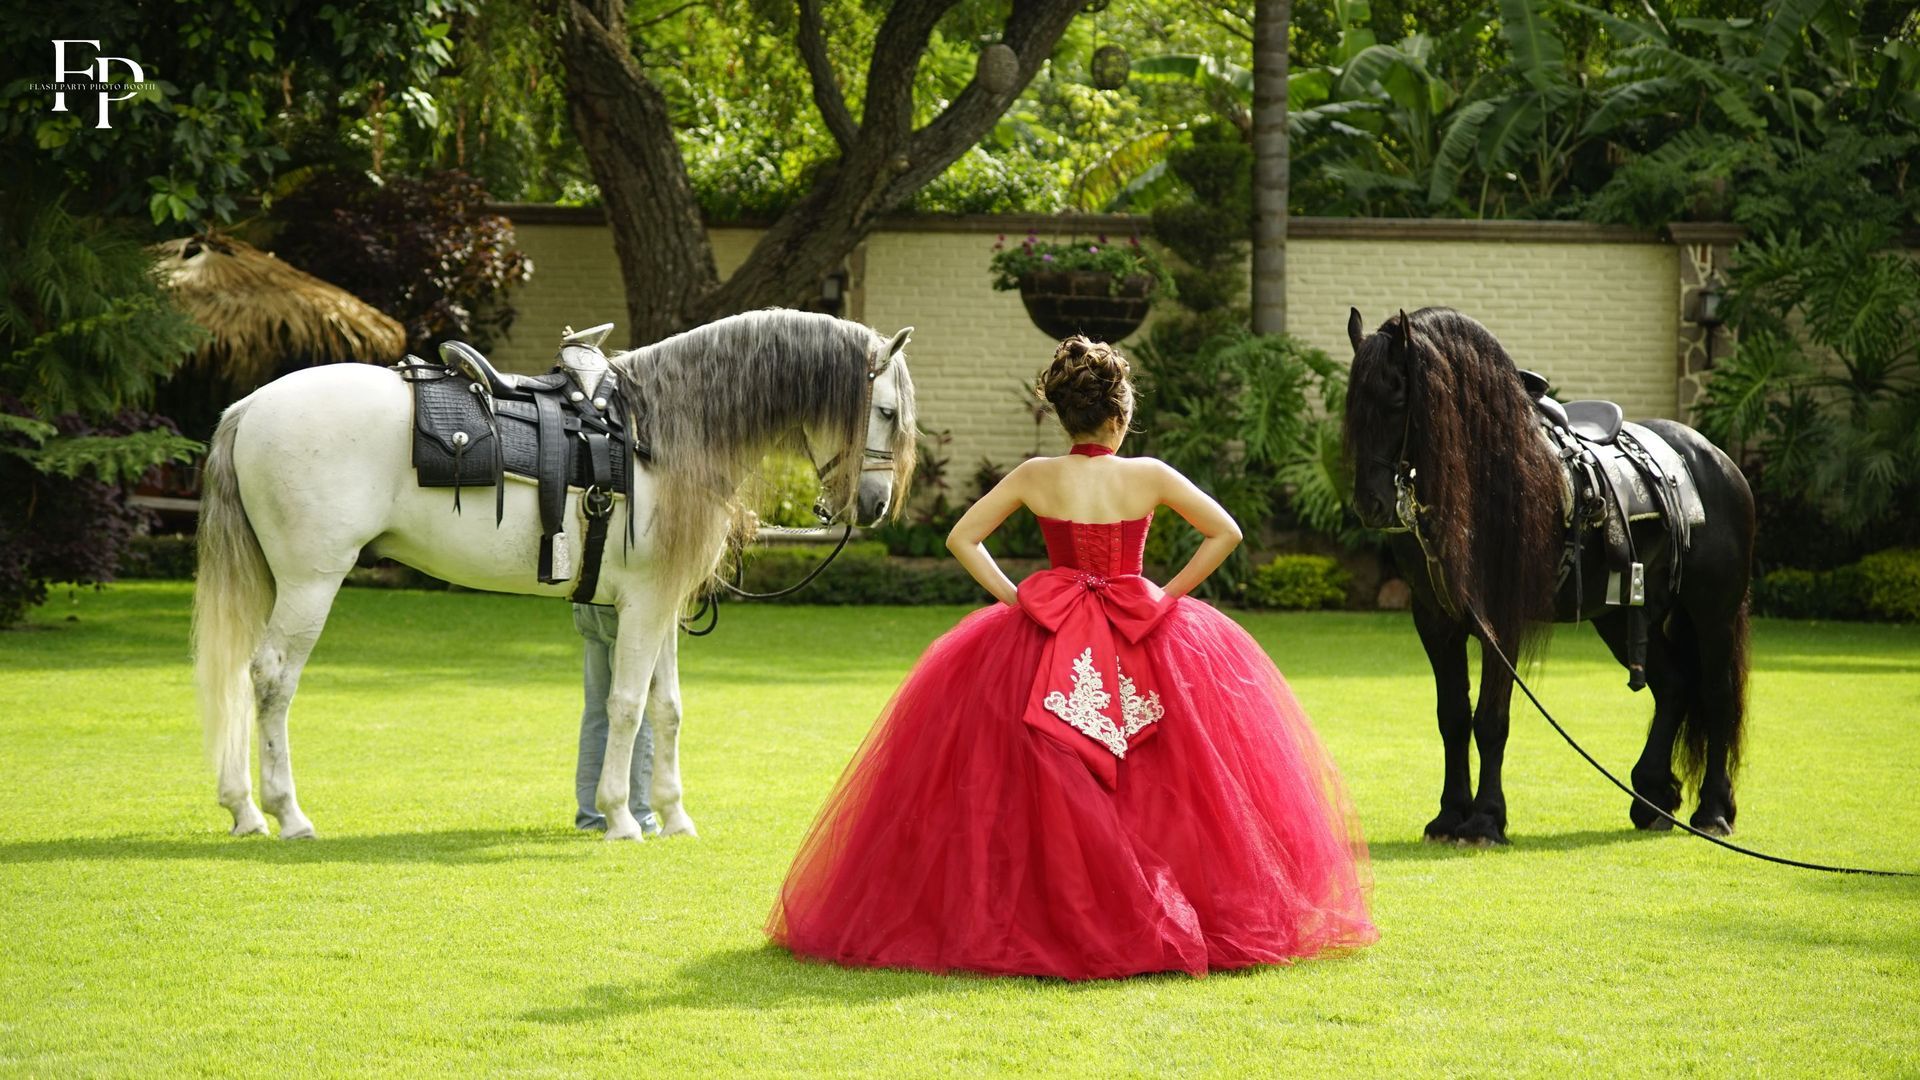 A Quinceañera in South Austin enjoys her big day with two gorgeous horses in the backdrop.